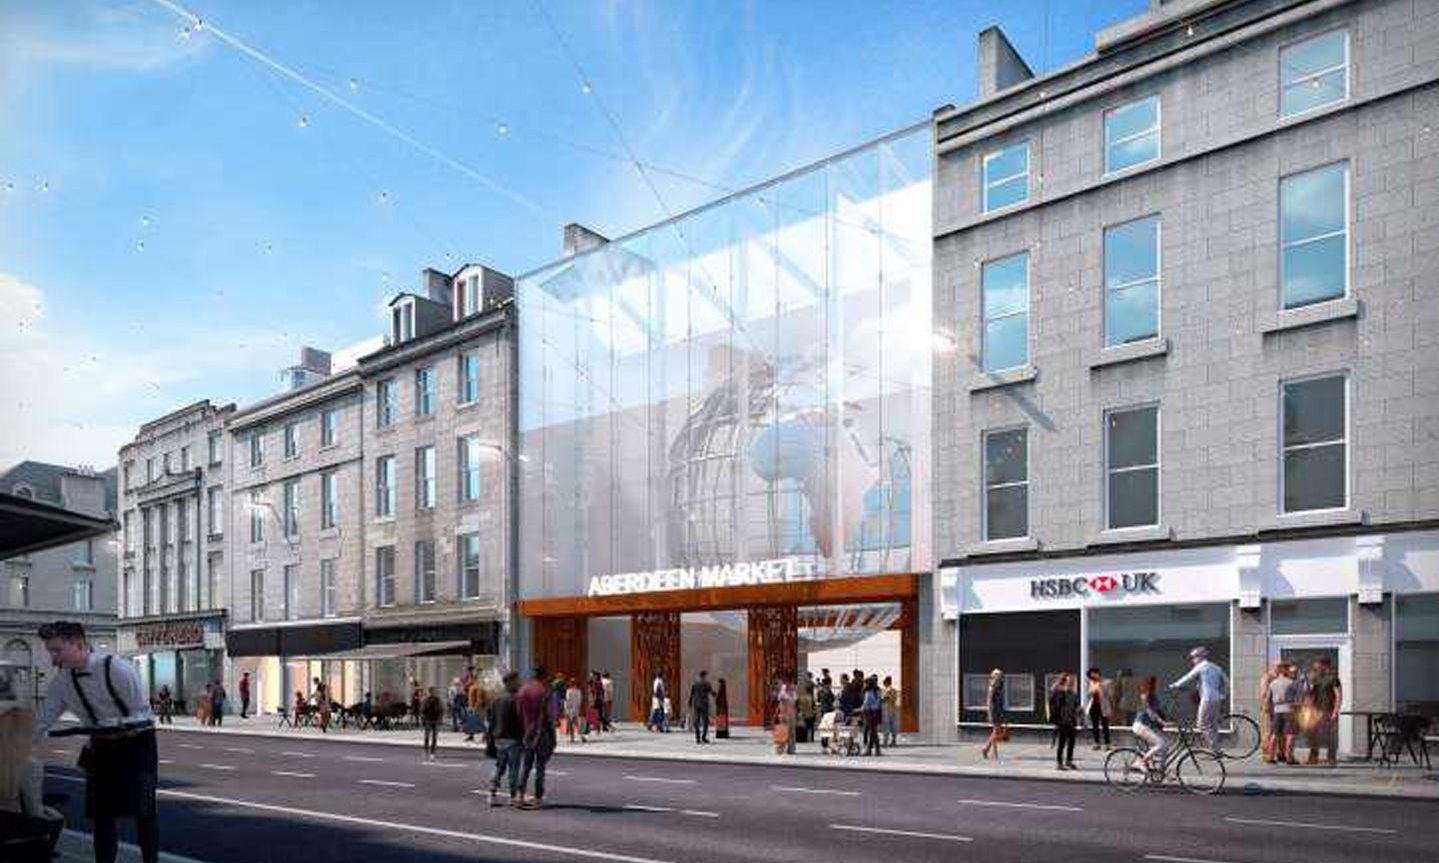 Plans for a glazed frontage of the new Aberdeen market at 91-93 Union Street would create a "striking new intervention" on the Granite Mile. Image: Halliday Fraser Munro/Aberdeen City Council